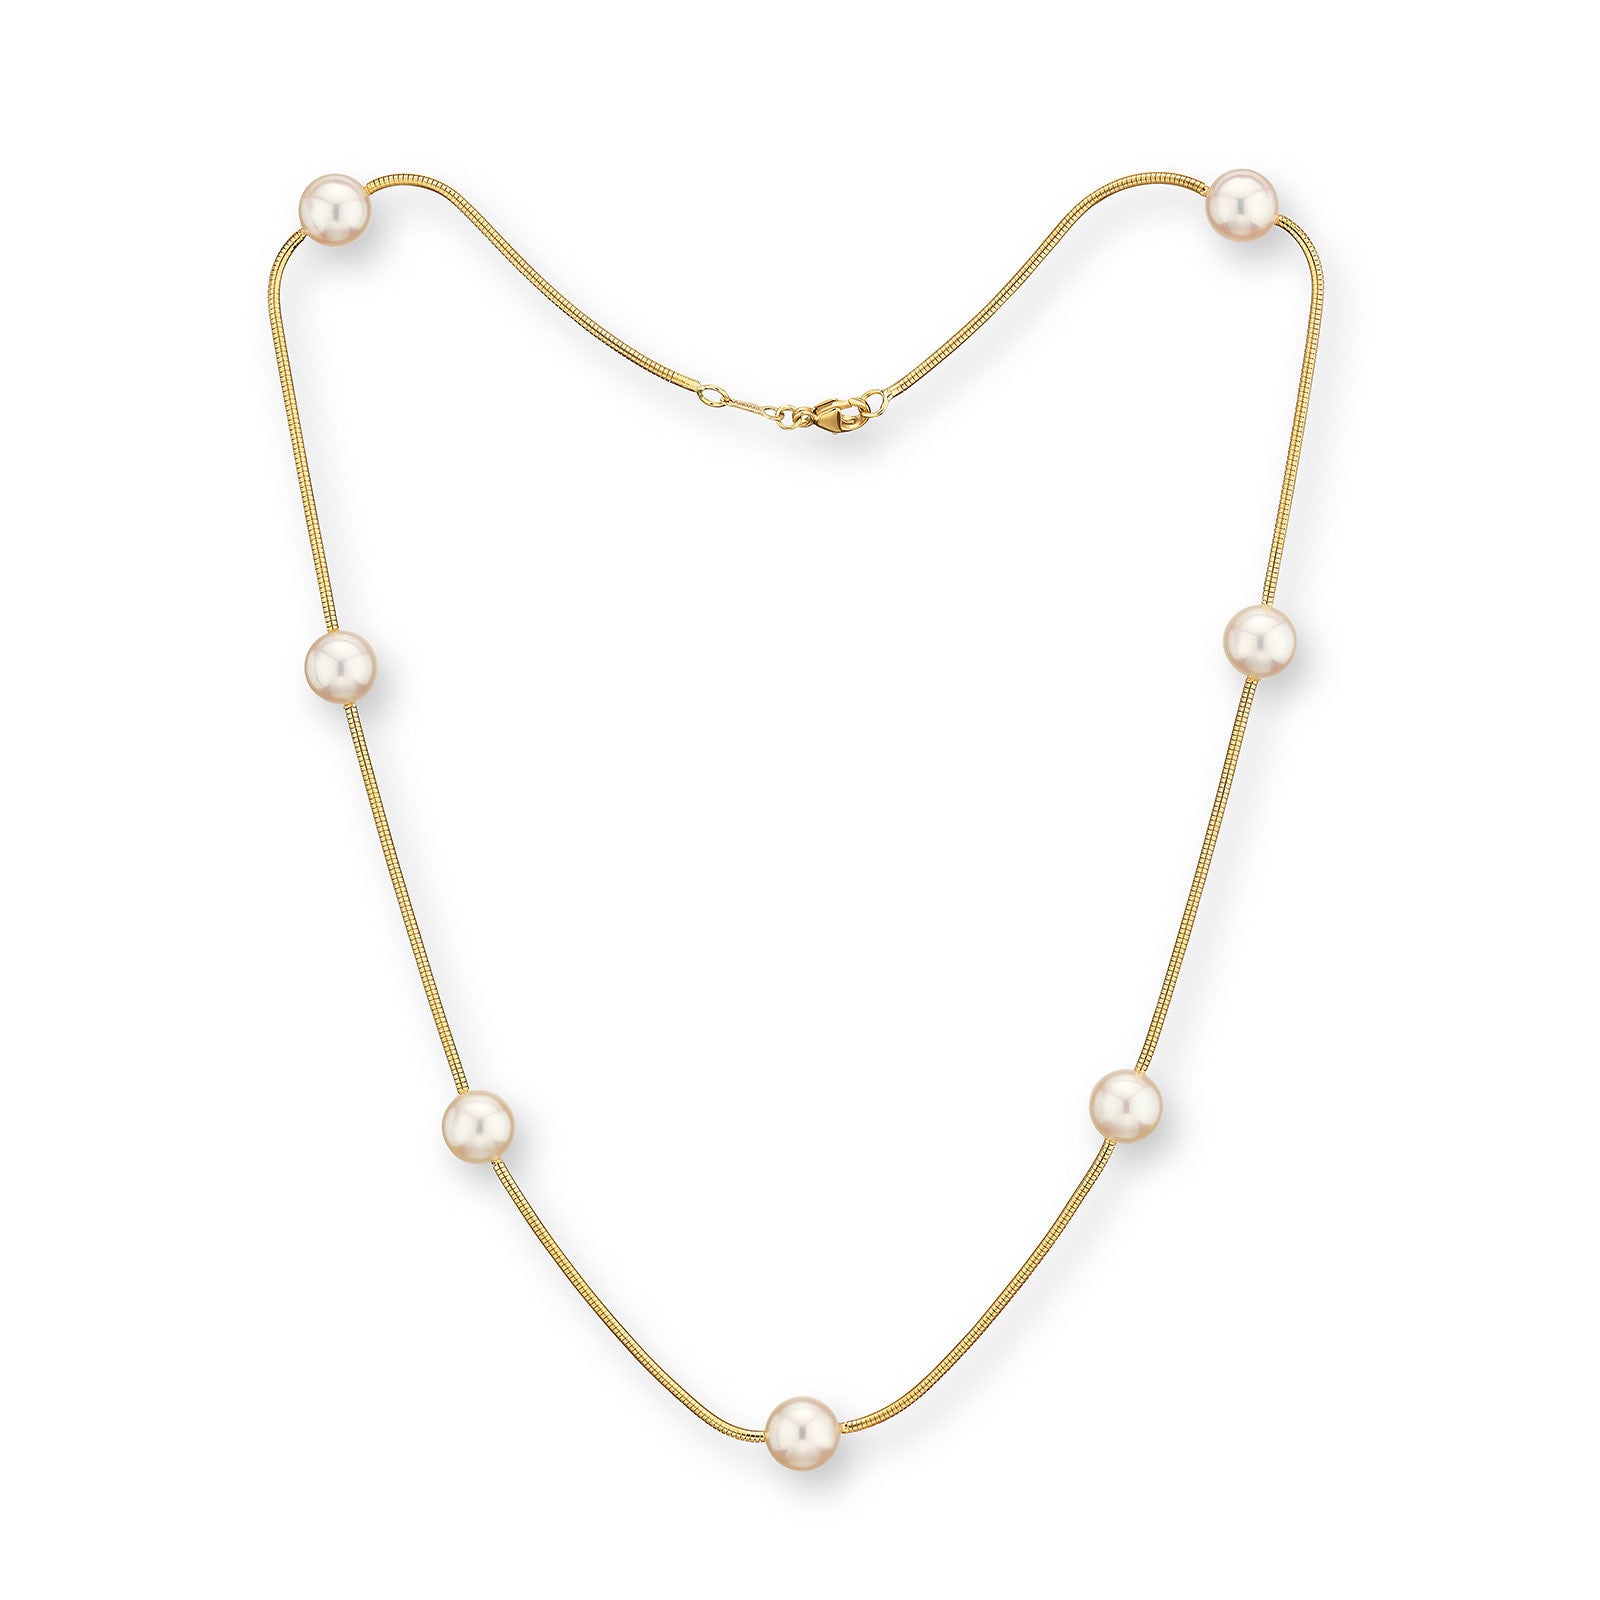 Buy Peach Freshwater Pearl Beaded Necklace 20 Inches in Sterling Silver at  ShopLC.